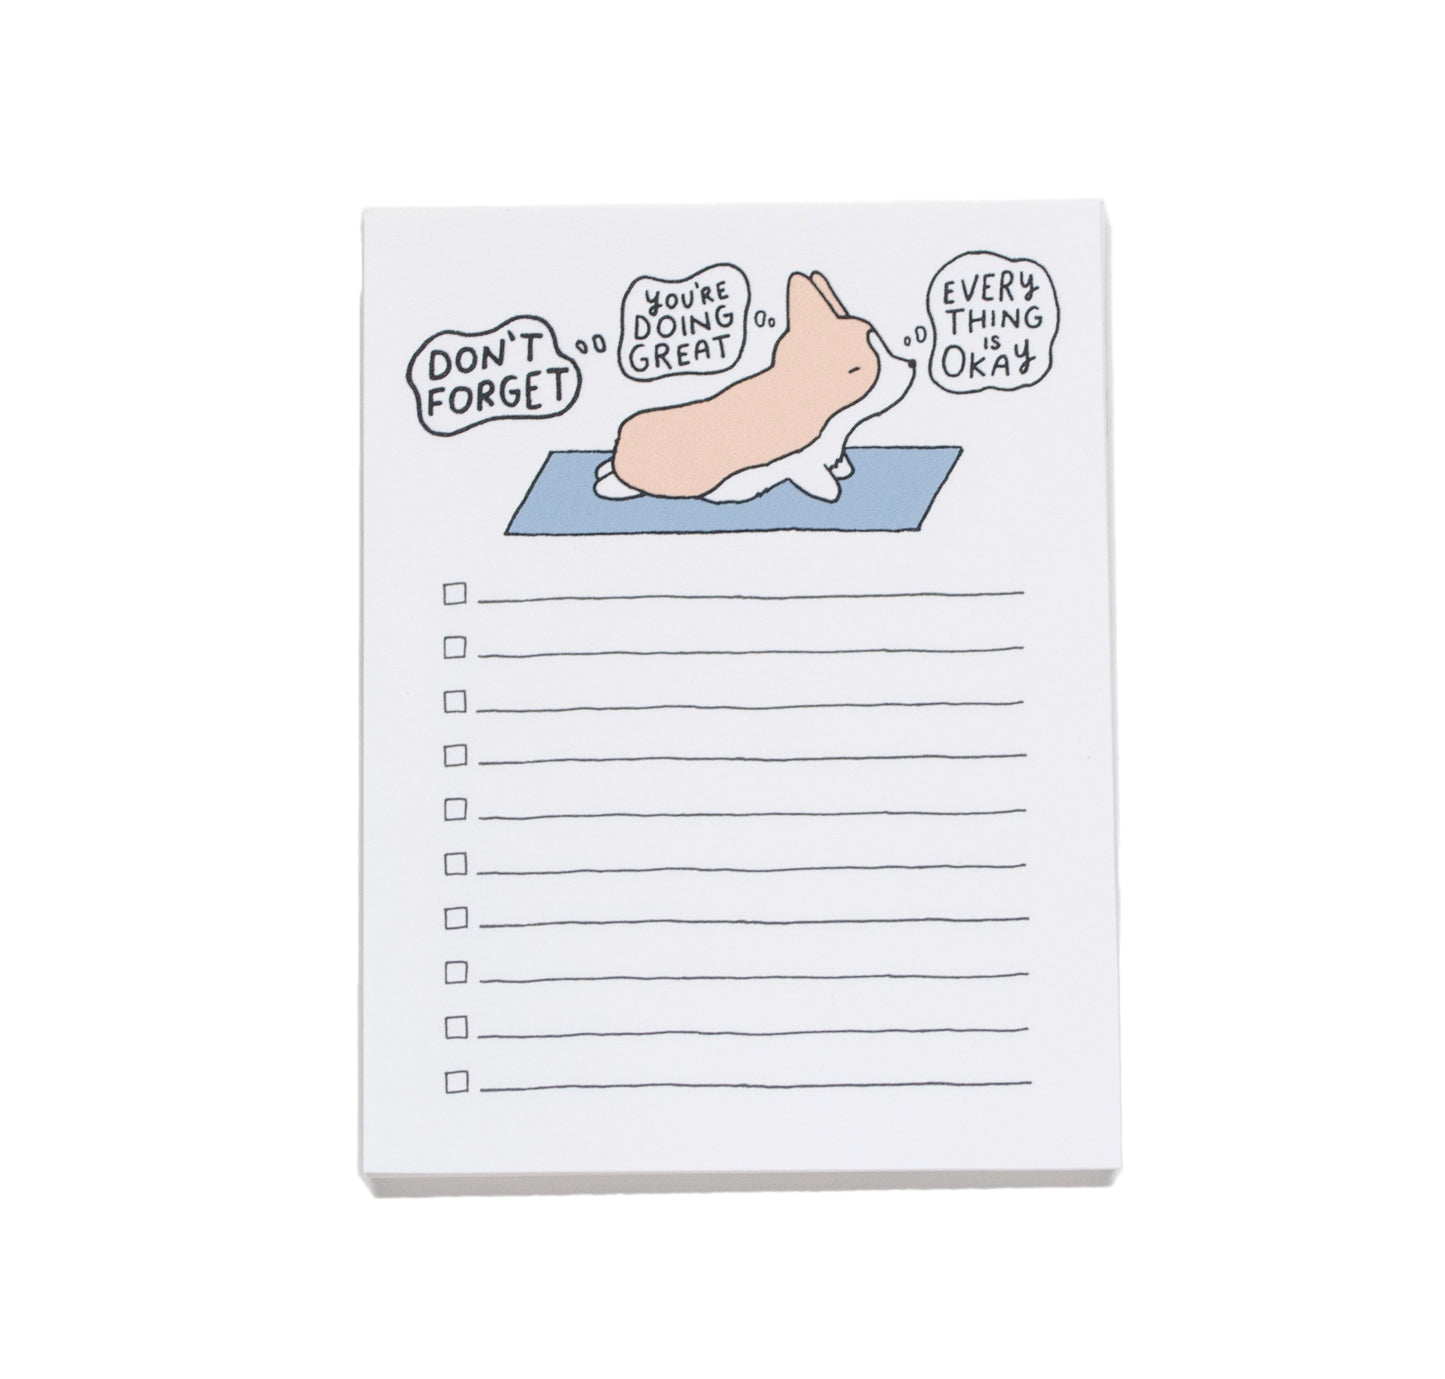 notepad design product photo has corgi and thought bubbles that say: don't forget, you're doing great, everything is okay